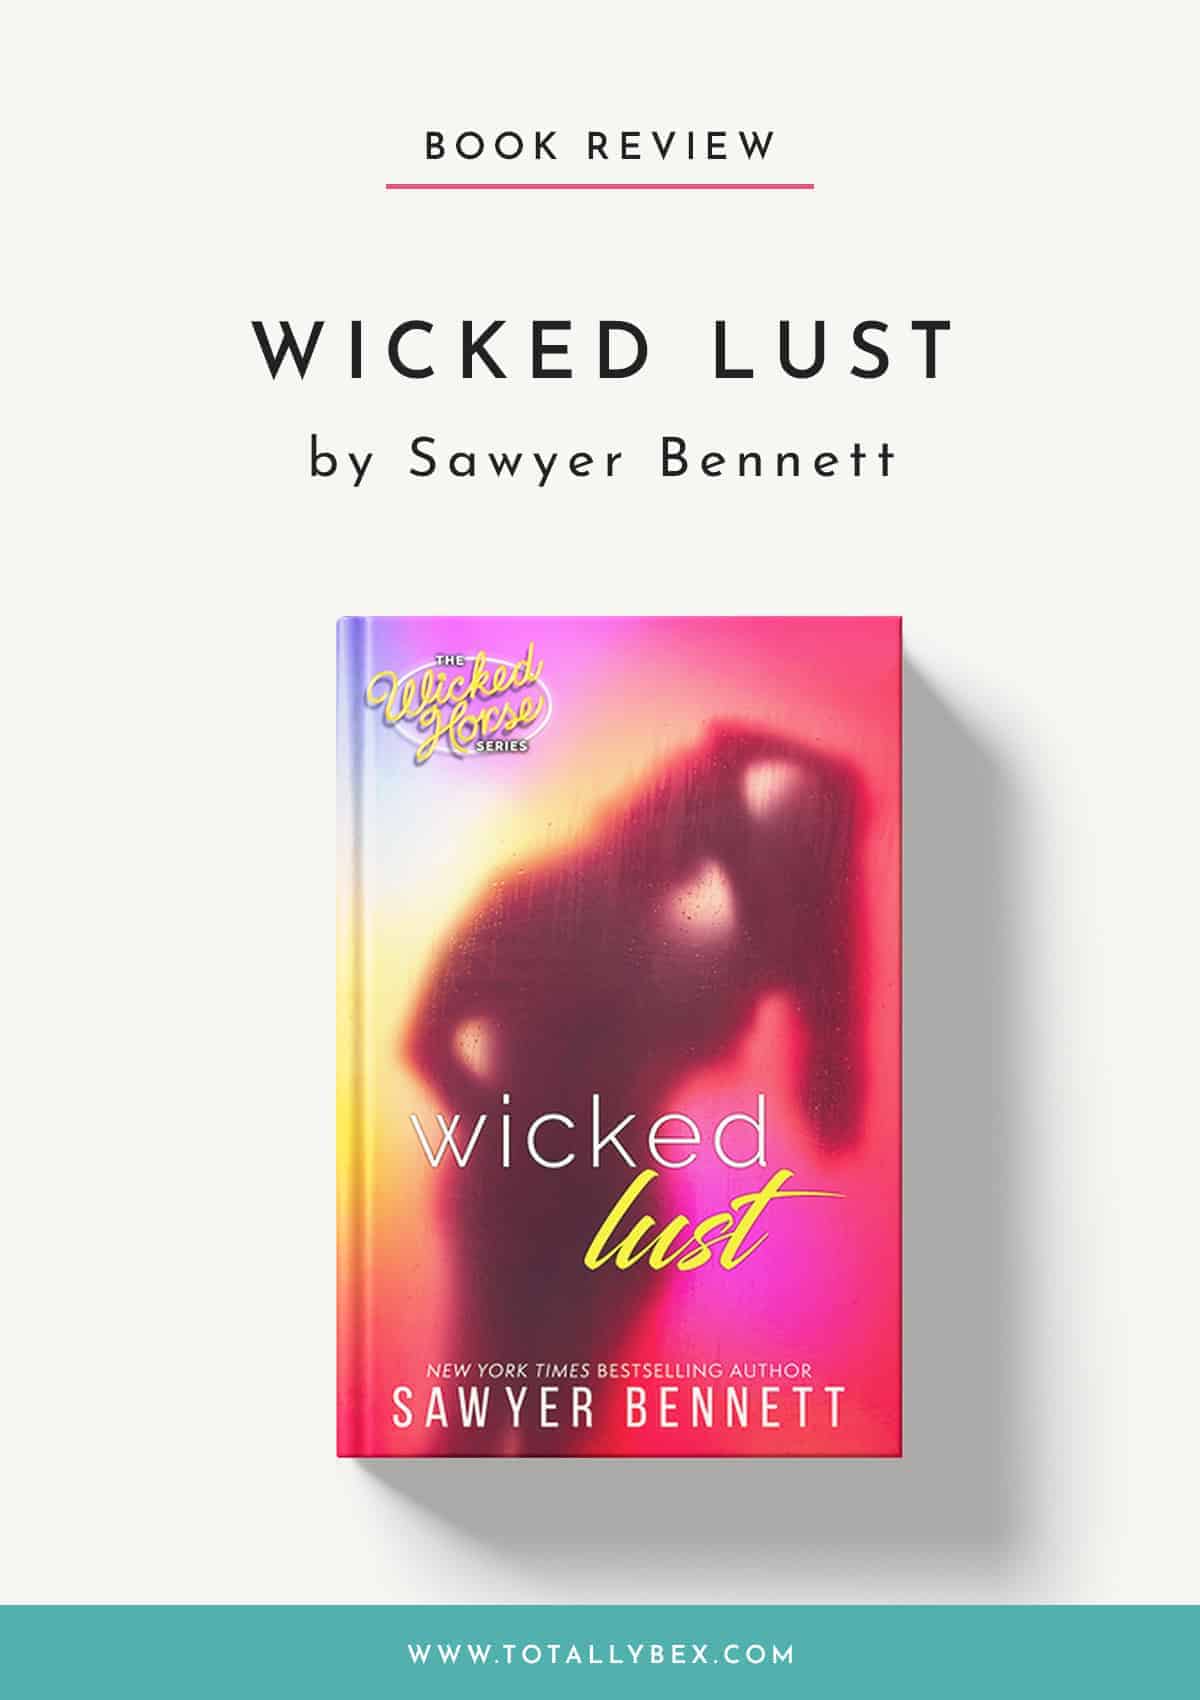 Wicked Lust by Sawyer Bennett – Wicked Horse Book 2